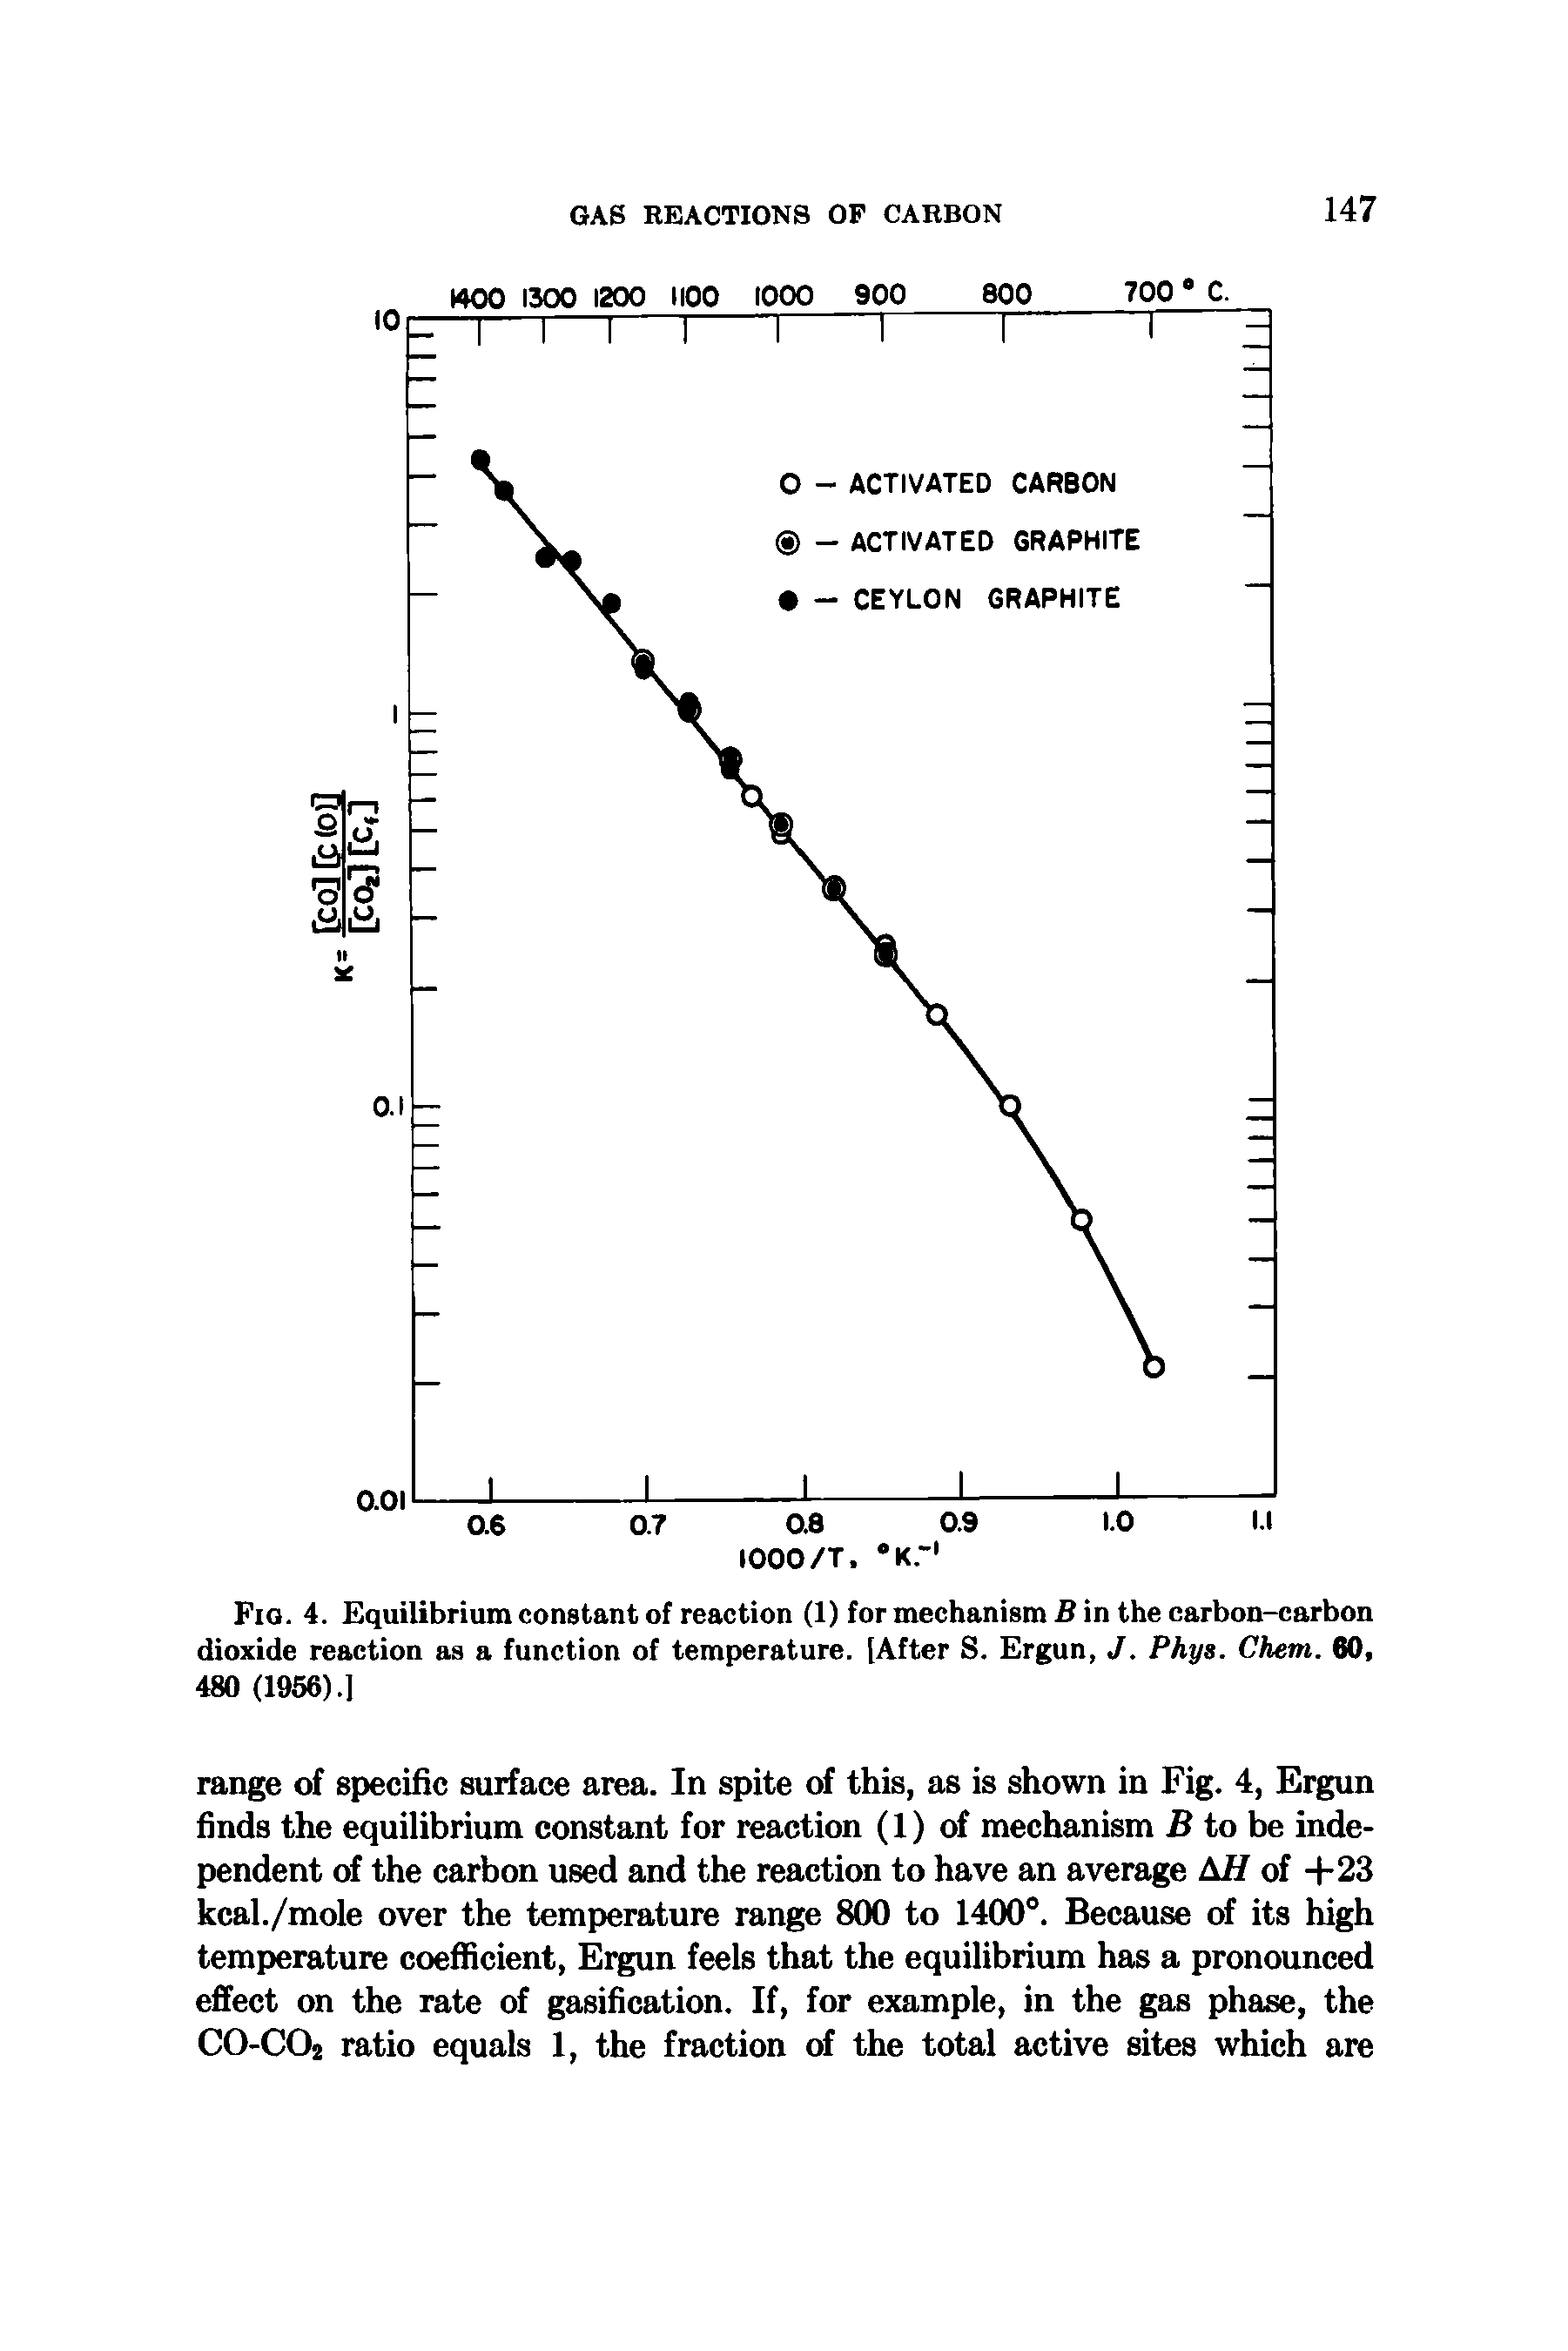 Fig. 4. Equilibrium constant of reaction (1) for mechanism B in the carbon-carbon dioxide reaction as a function of temperature. [After S. Ergun, J. Phys. Chem. 60, 480 (1956).]...